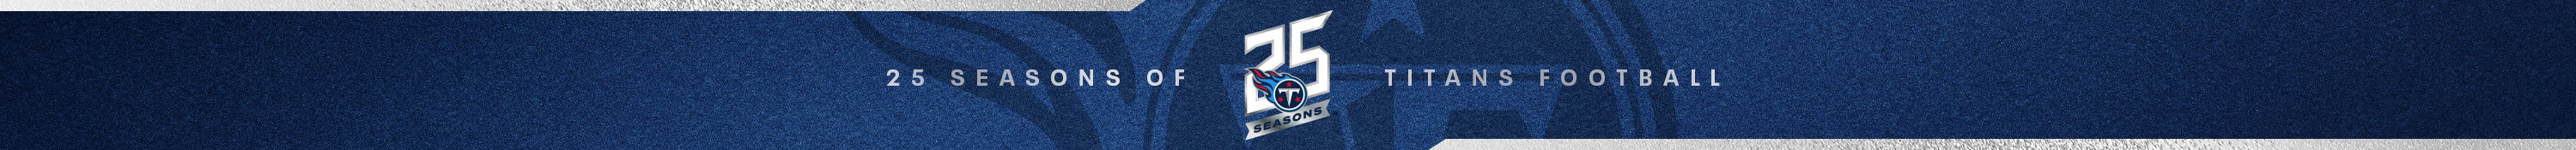 Titans remind fans of NFL's clear bag policy ahead of new season